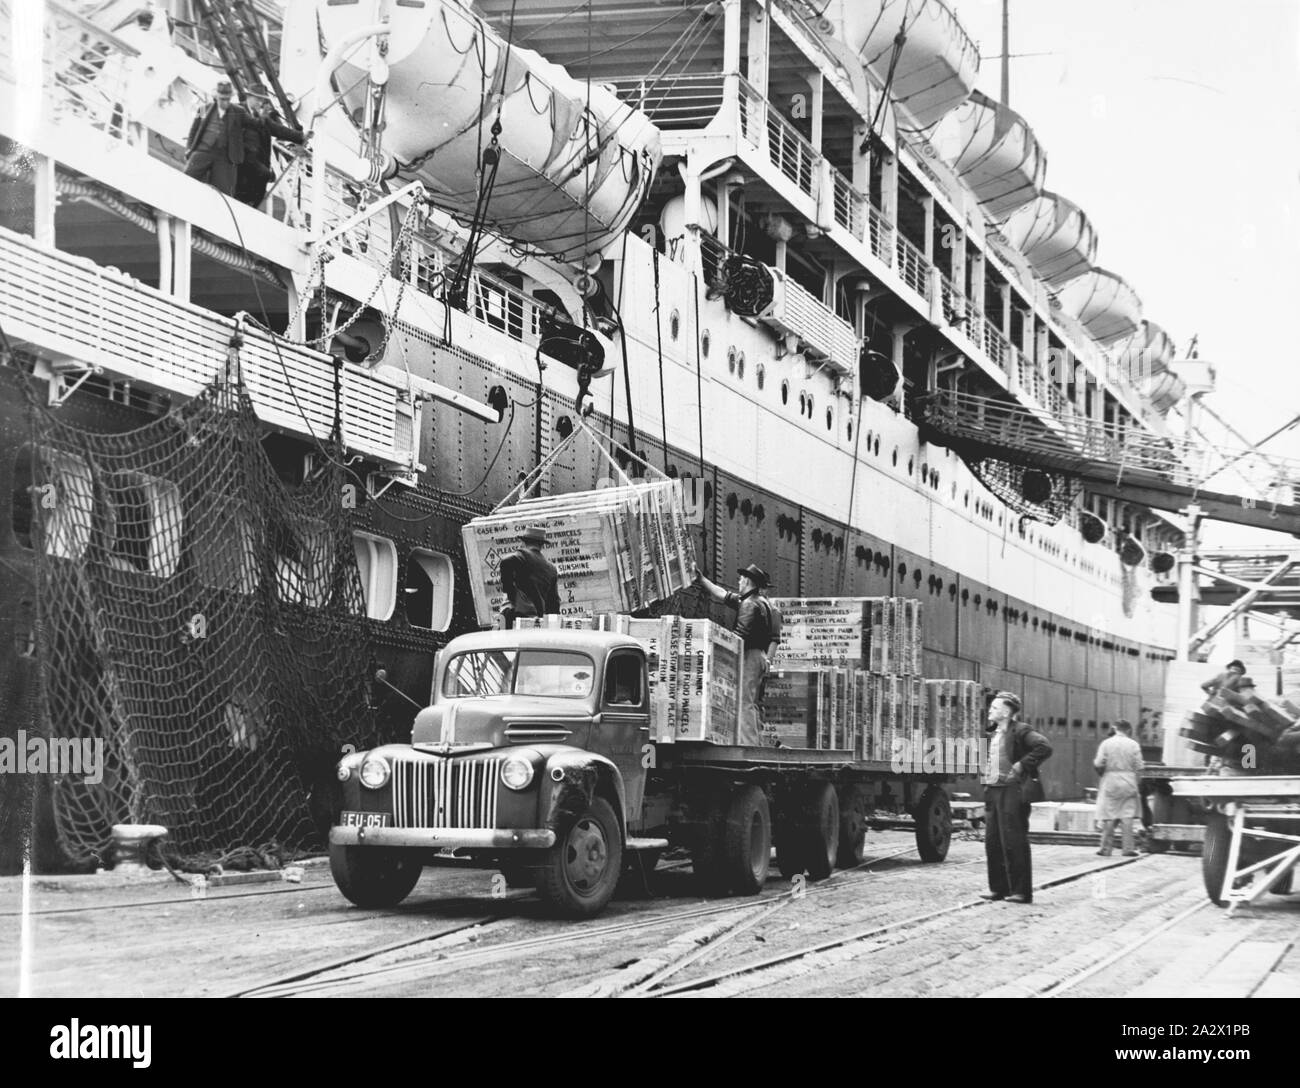 Photograph - H.V. McKay Massey Harris, Orontes Being Loaded with Food Parcels, Port Melbourne, Victoria, Dec 1948, Black and white photograph of the ship 'Orontes' being loaded with food parcels from a Ford truck for the 'Food for British Workers Appeal'. Photograph is located in an album: Volume No. 10: Portraits, Sundry Machines, Royal Show 1945-51, page 135. This is one of 25 albums that provide detailed visual documentation of the activities of the McKay enterprise. This image forms part of Stock Photo